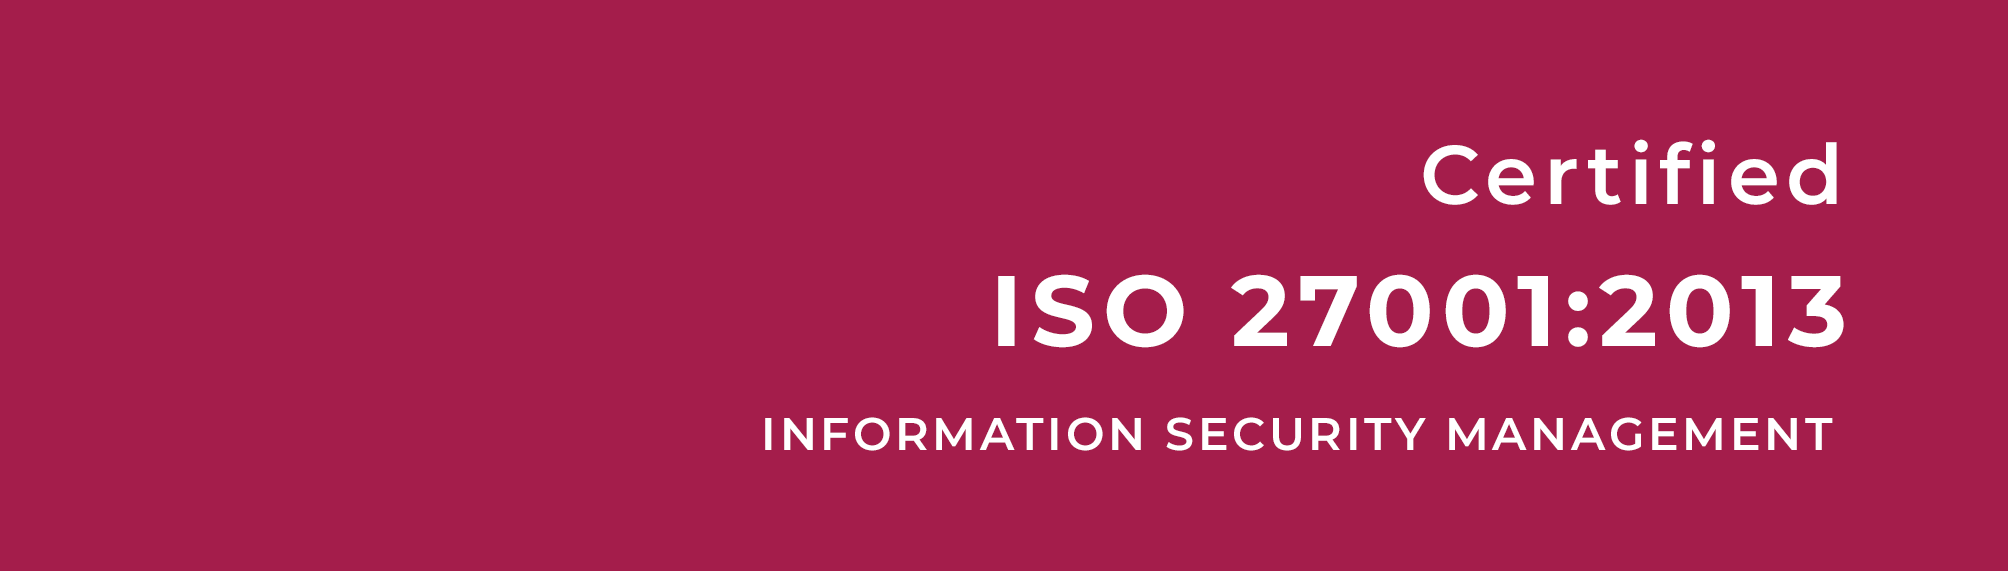 Certified ISO 27001:2013 Information Security Management